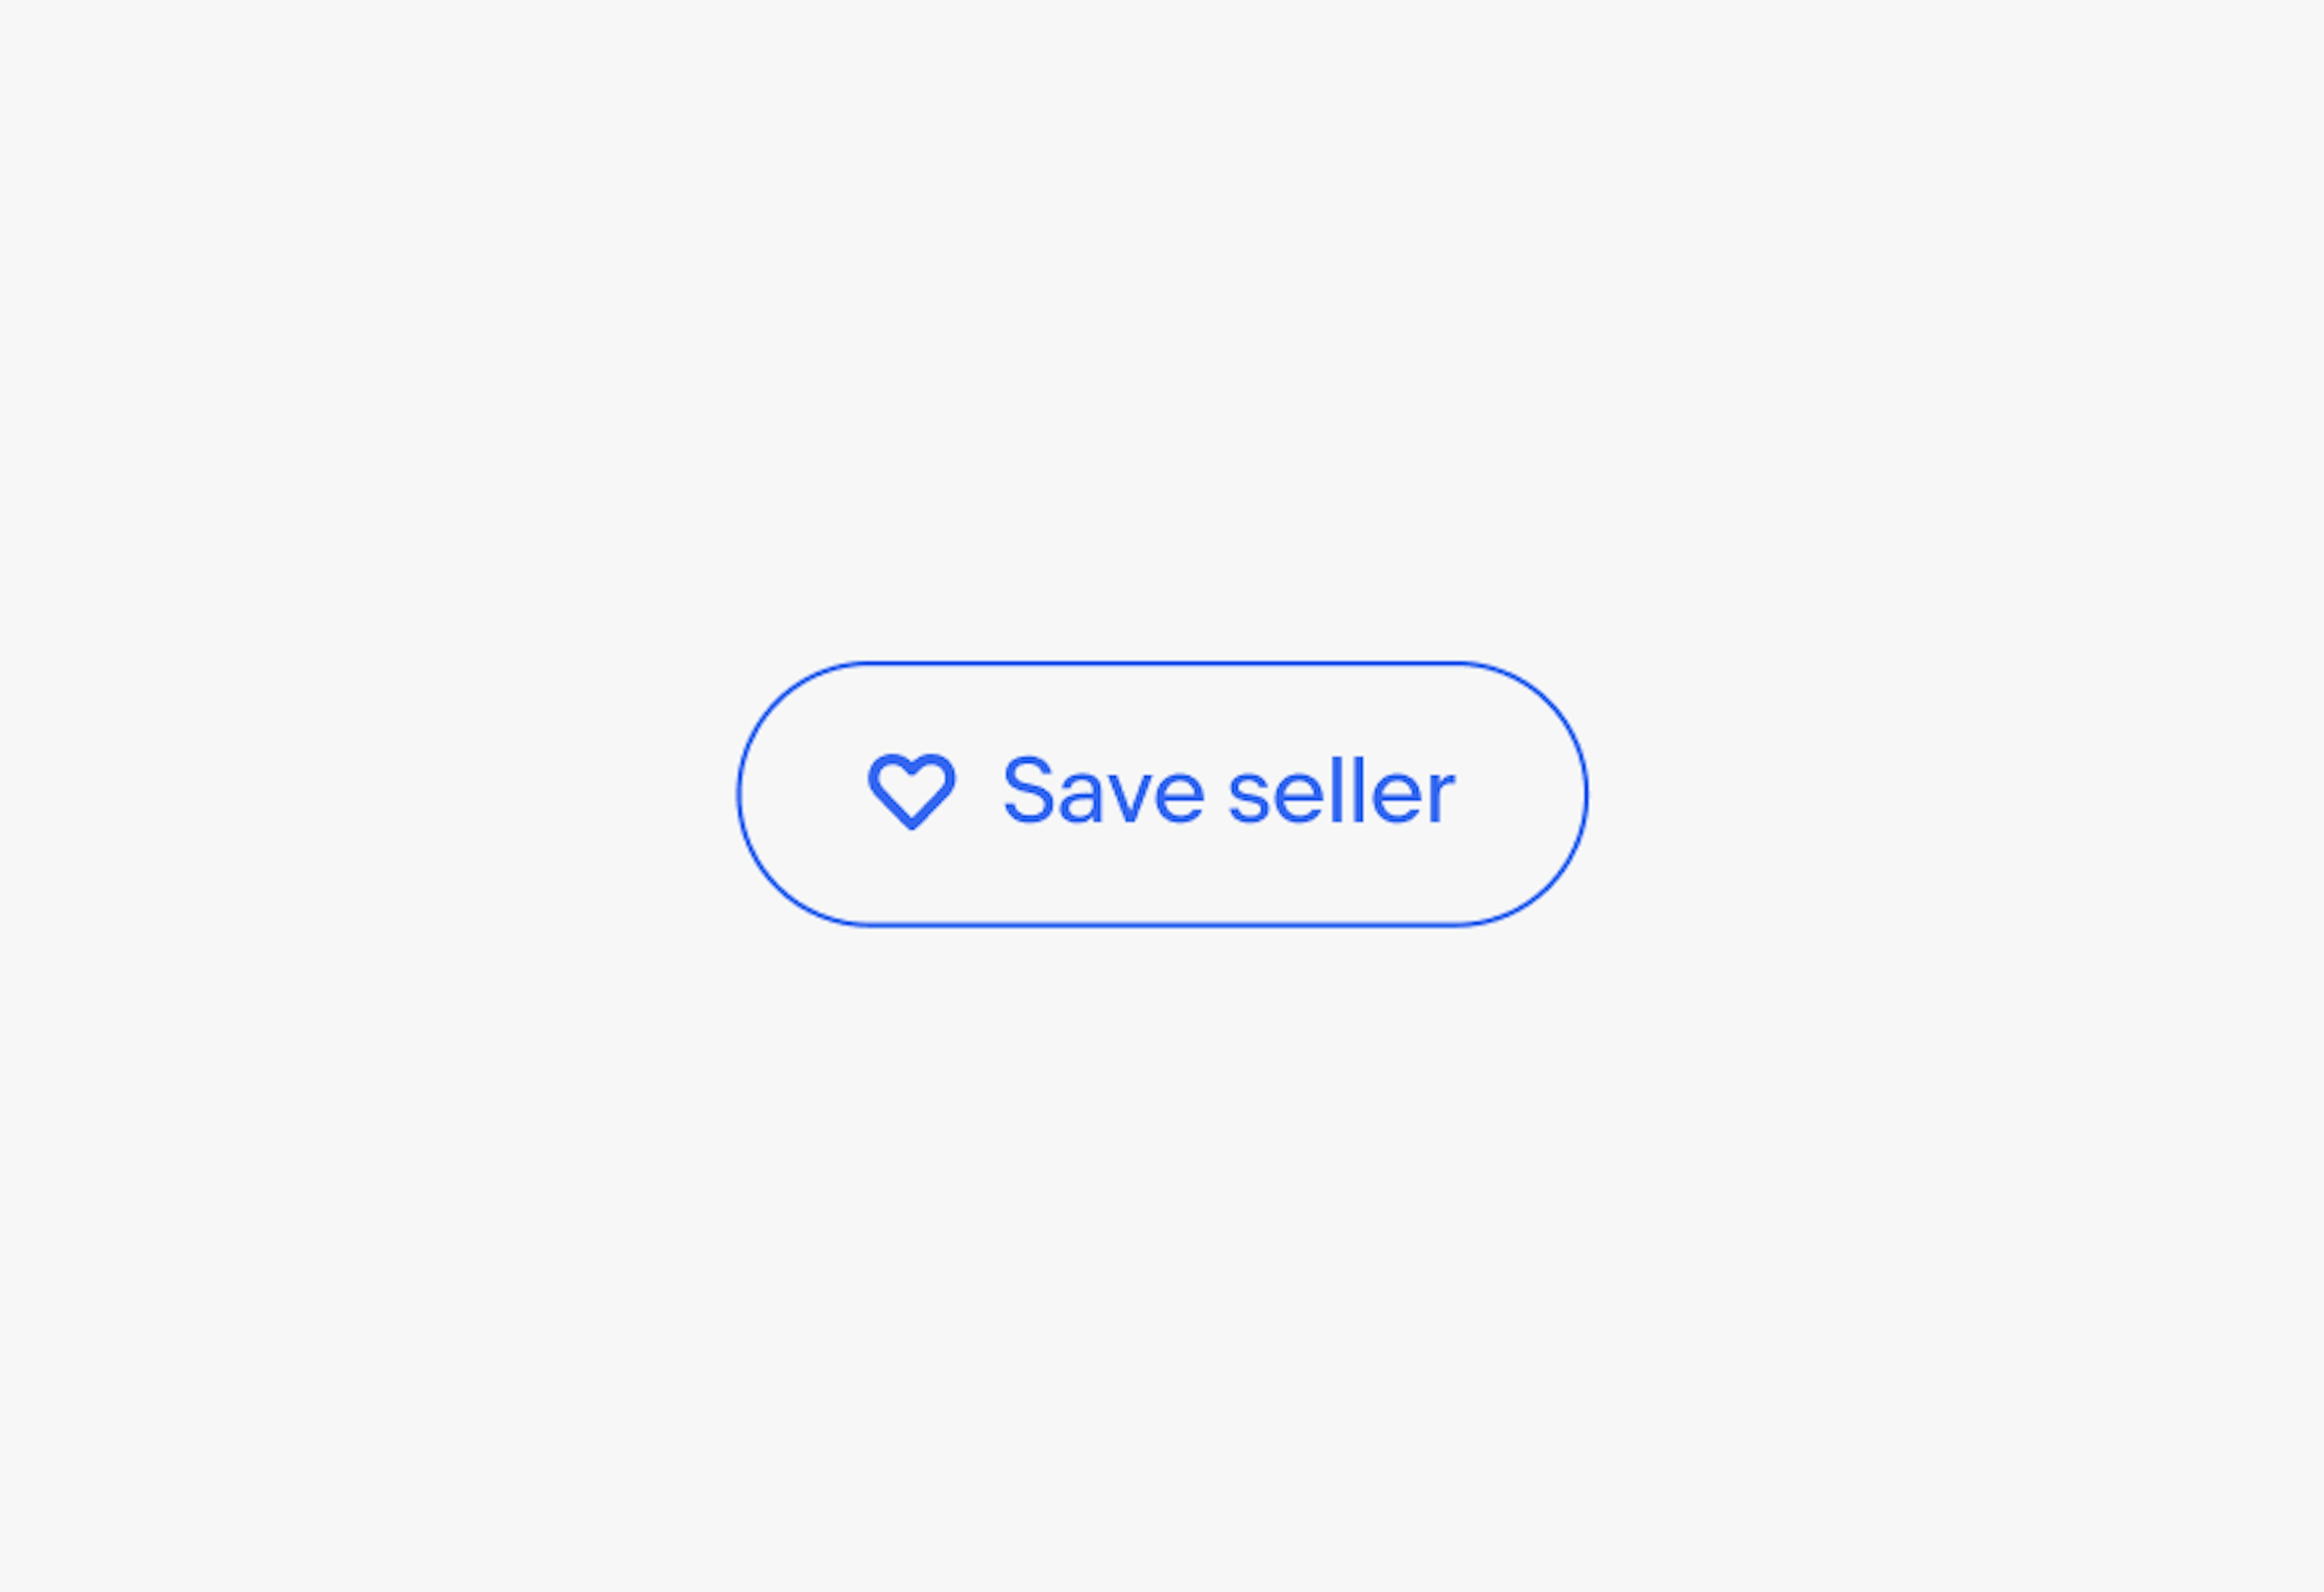 A button with an icon and text inside. The icon is a heart and the text is “Save seller”.